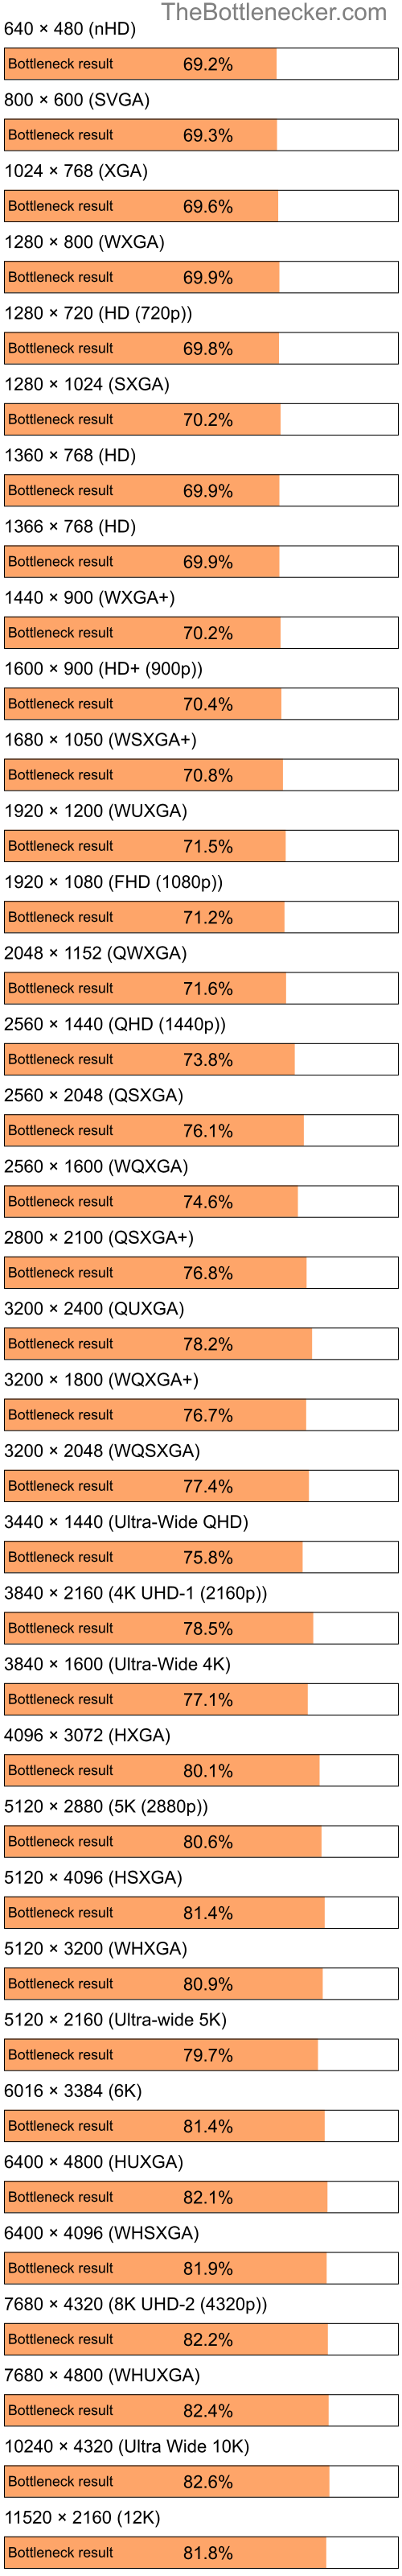 Bottleneck results by resolution for Intel Atom N270 and AMD Mobility Radeon X1350 in Processor Intense Tasks